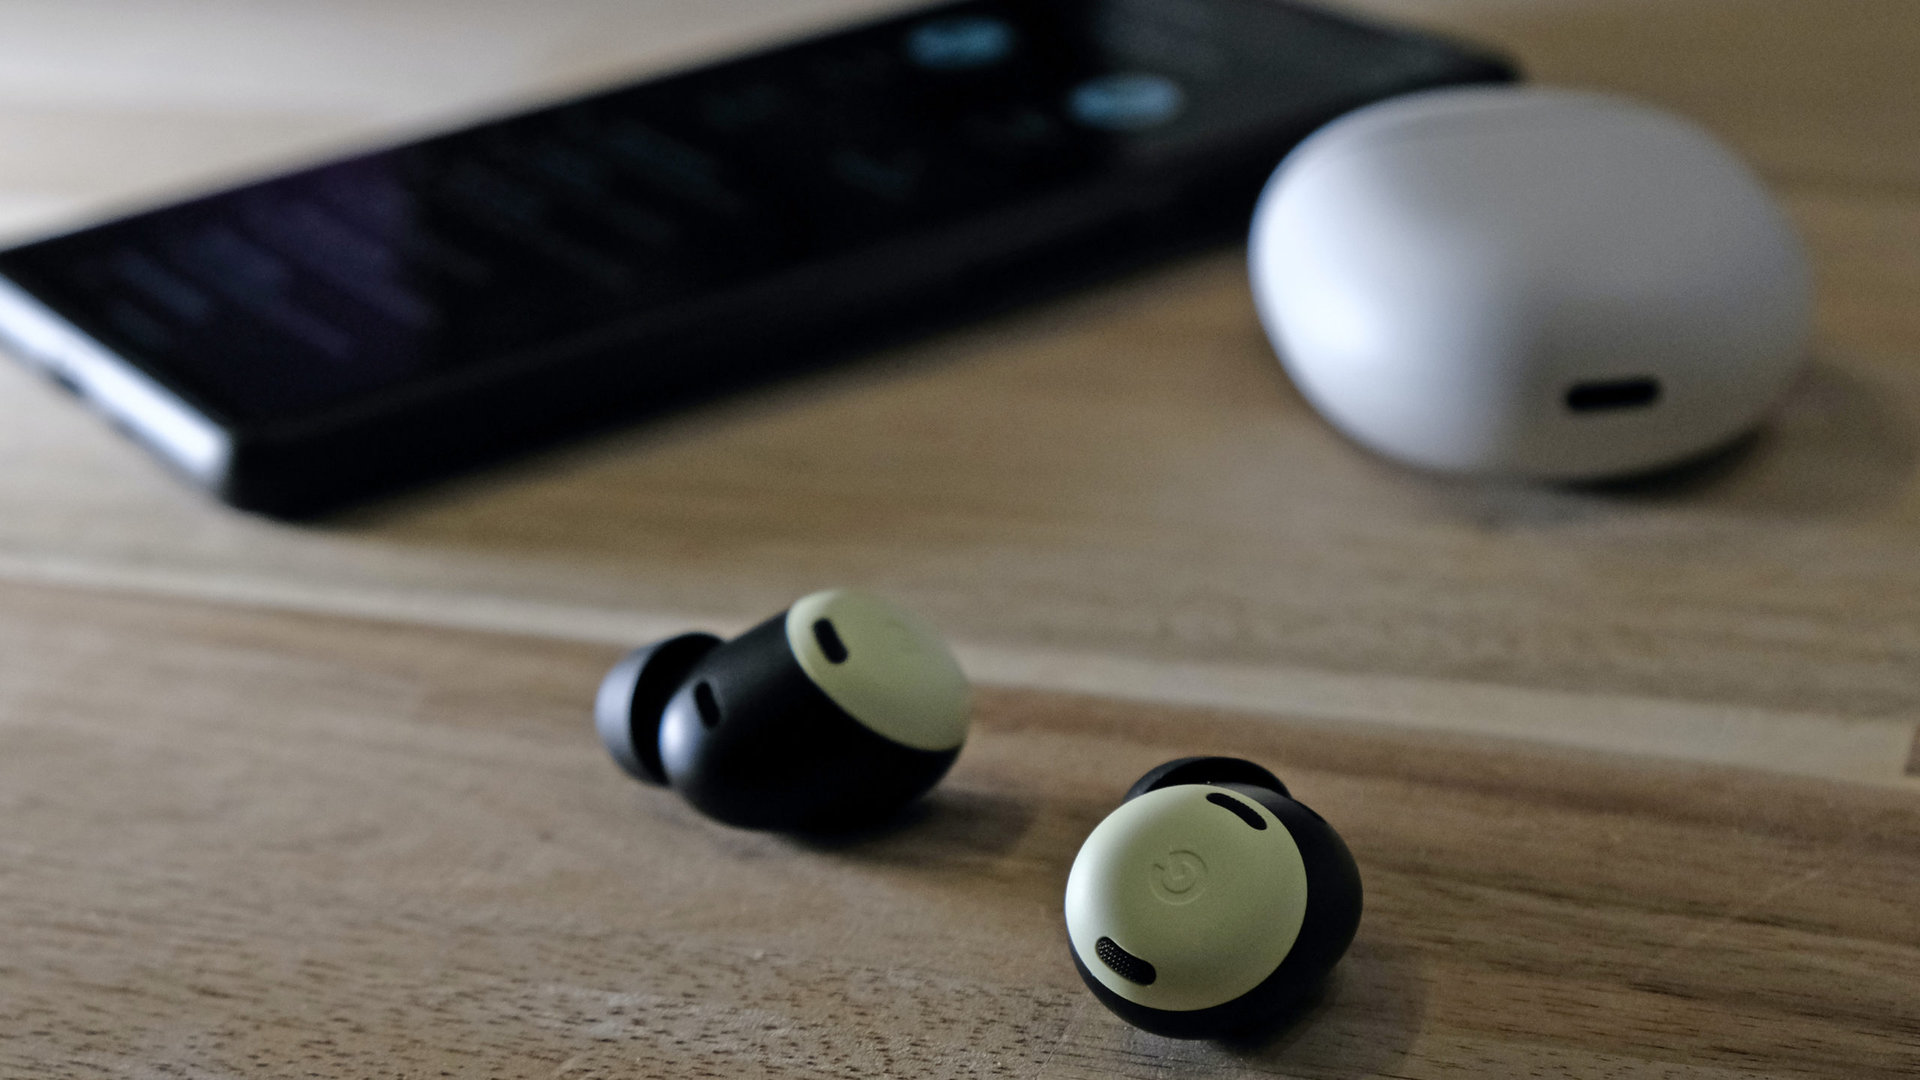 Google Pixel Buds Pro headphones on a table phone